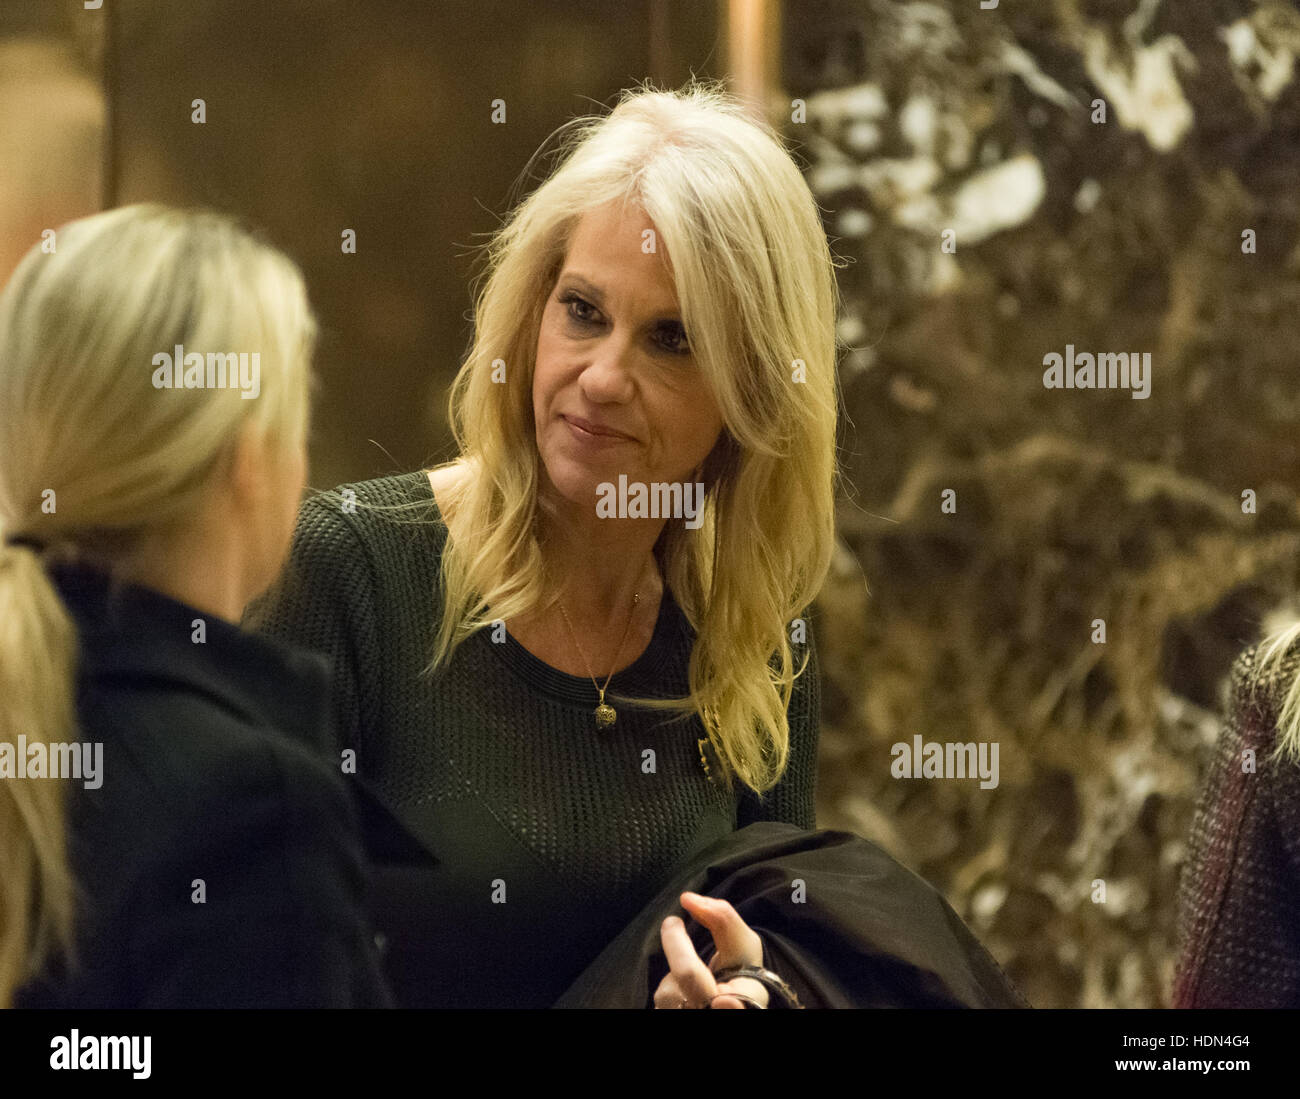 New York, Us. 01st Dec, 2016. Trump campaign manager and political strategist Kellyanne Conway is seen in the lobby of Trump Tower in New York, NY, USA upon her arrival on December 12, 2016. Credit: Albin Lohr-Jones/Pool via CNP - NO WIRE SERVICE - Photo: Albin Lohr-Jones/Consolidated News Photos/Albin Lohr-Jones - Pool via CNP/dpa/Alamy Live News Stock Photo